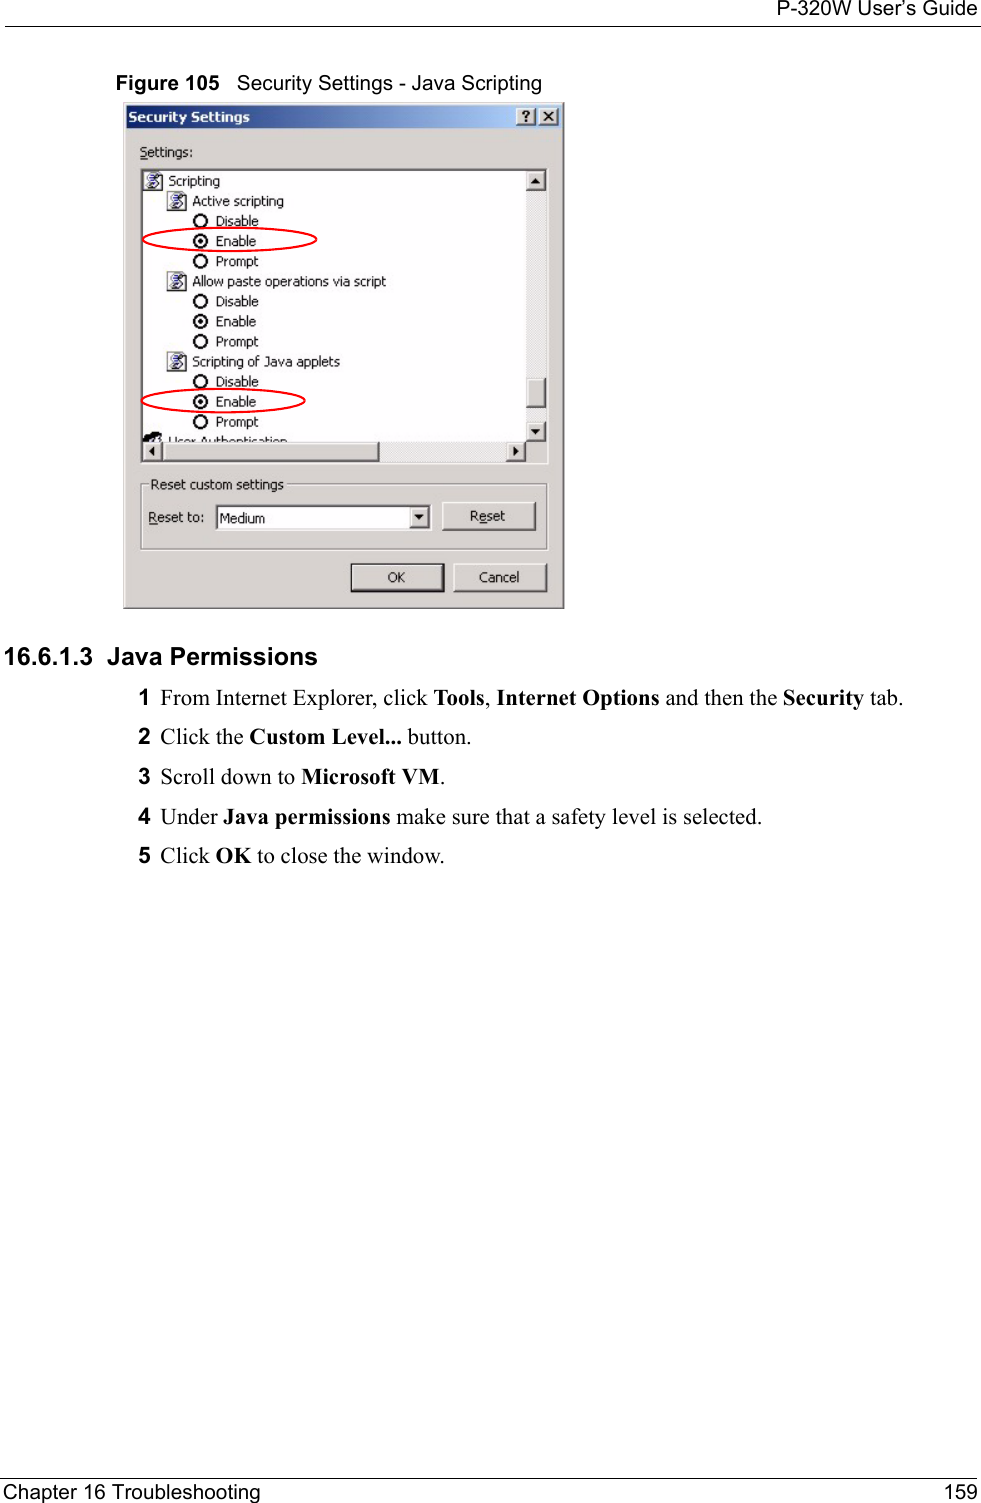 P-320W User’s GuideChapter 16 Troubleshooting 159Figure 105   Security Settings - Java Scripting16.6.1.3  Java Permissions1From Internet Explorer, click Tools, Internet Options and then the Security tab. 2Click the Custom Level... button. 3Scroll down to Microsoft VM. 4Under Java permissions make sure that a safety level is selected.5Click OK to close the window.